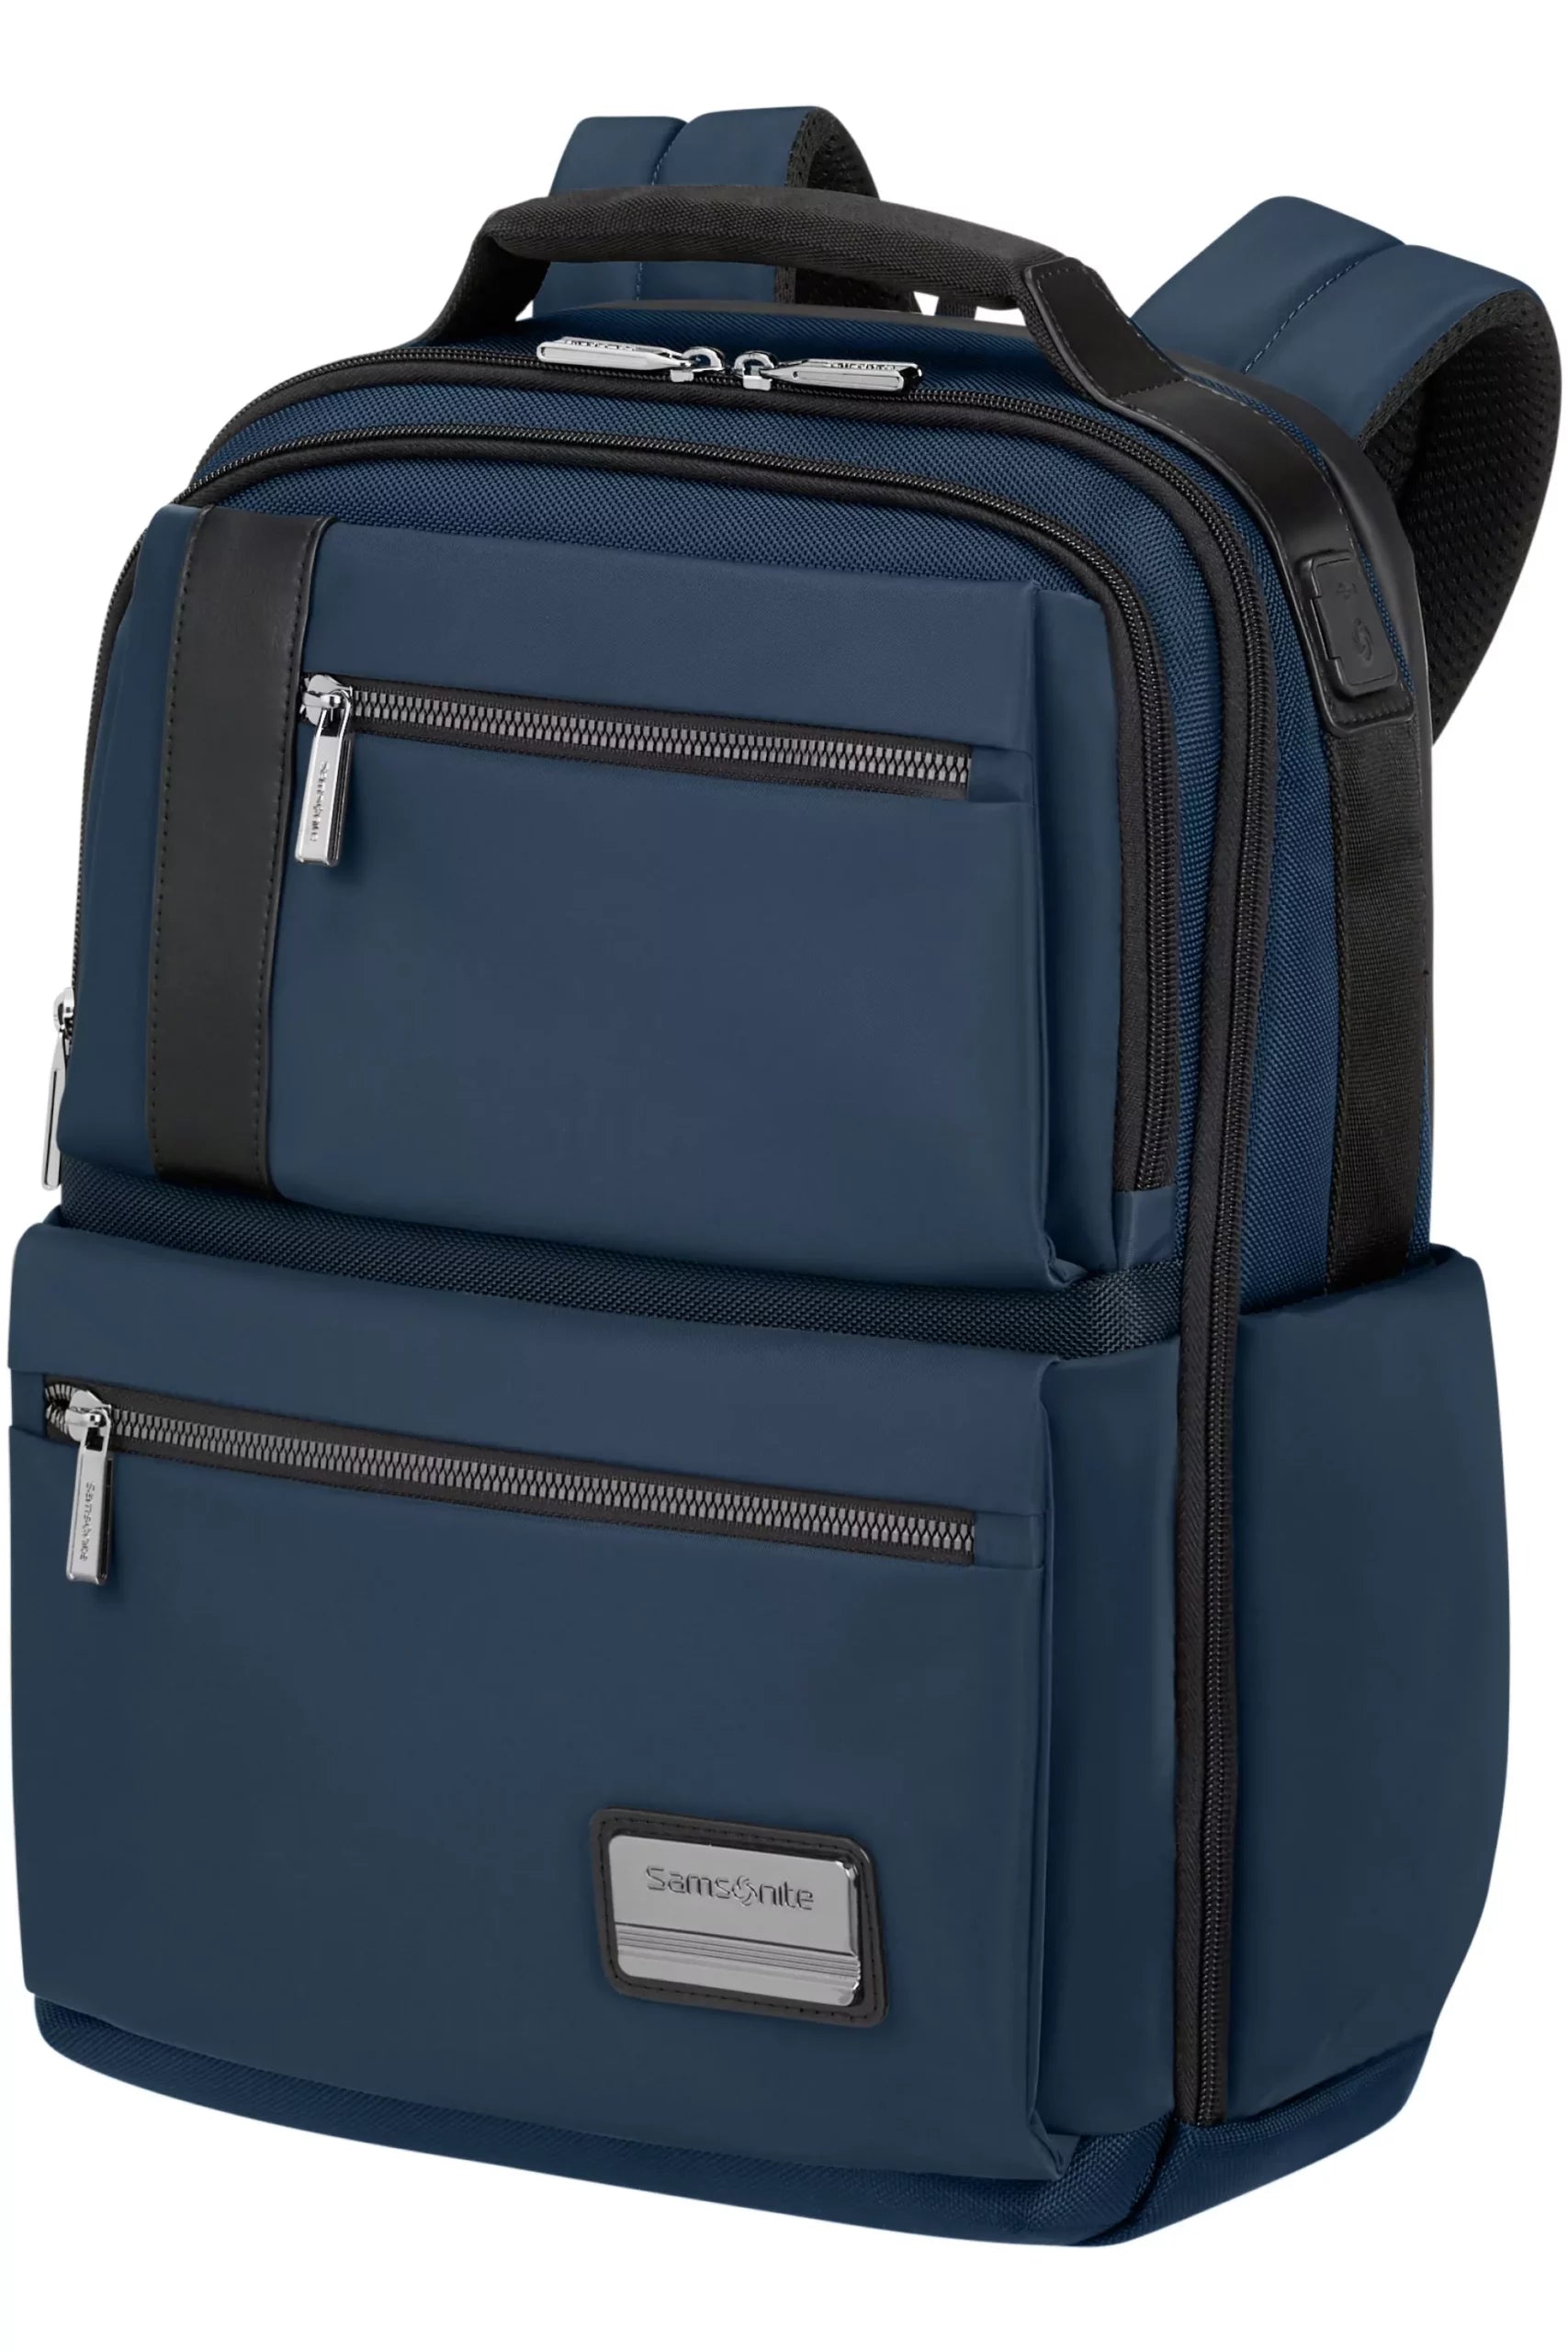 137207-1971-137207_1971_OPENROAD_2.0_LAPTOP_BACKPACK_14.1_FRONT34-f2b7567b-3ce1-454d-a520-acbb00e73b44